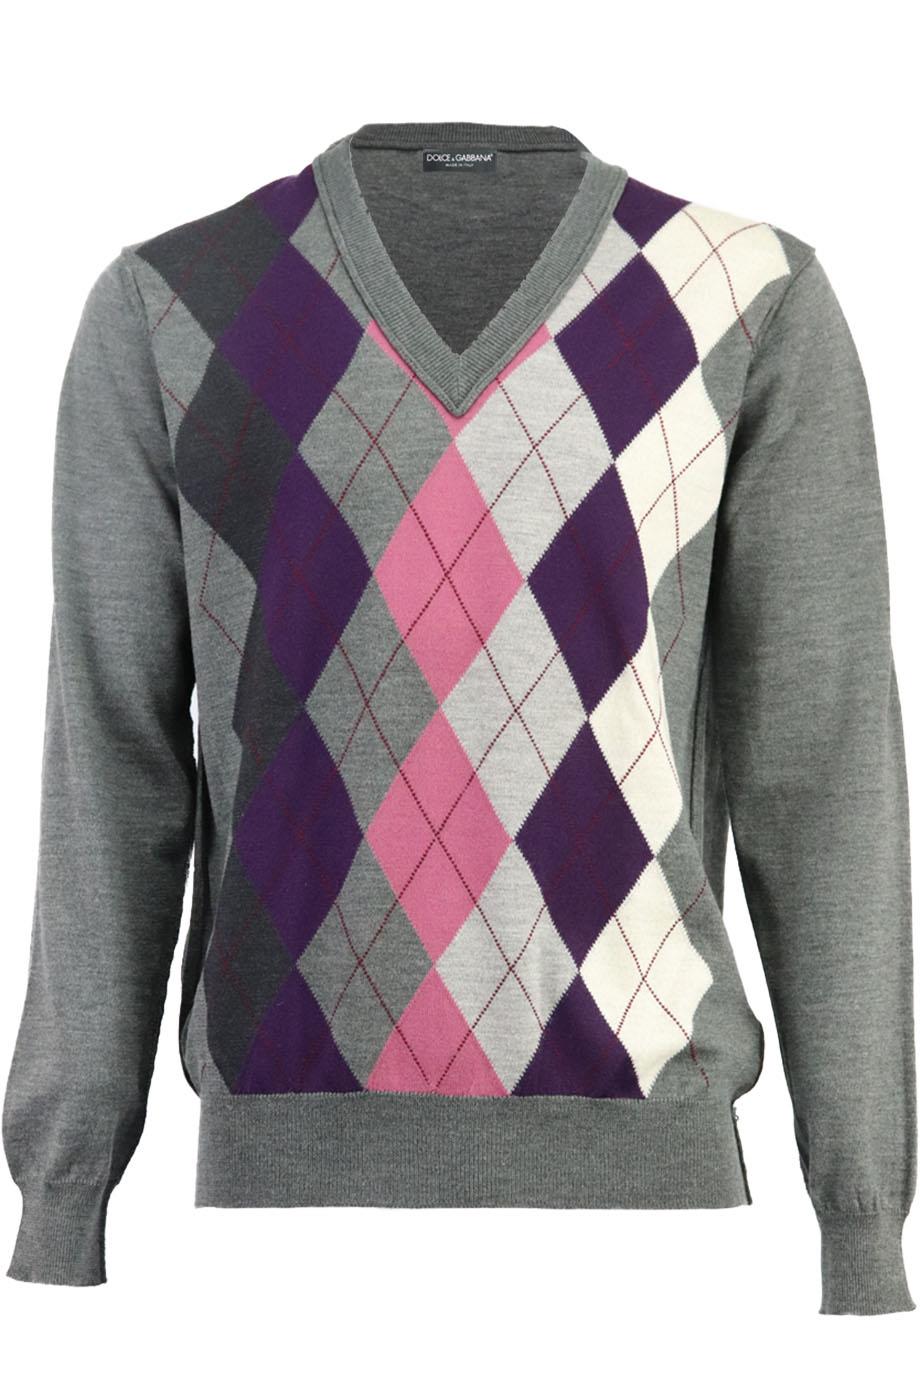 DOLCE AND GABBANA MEN'S ARGYLE WOOL SWEATER IT 50 UK/US CHEST 40